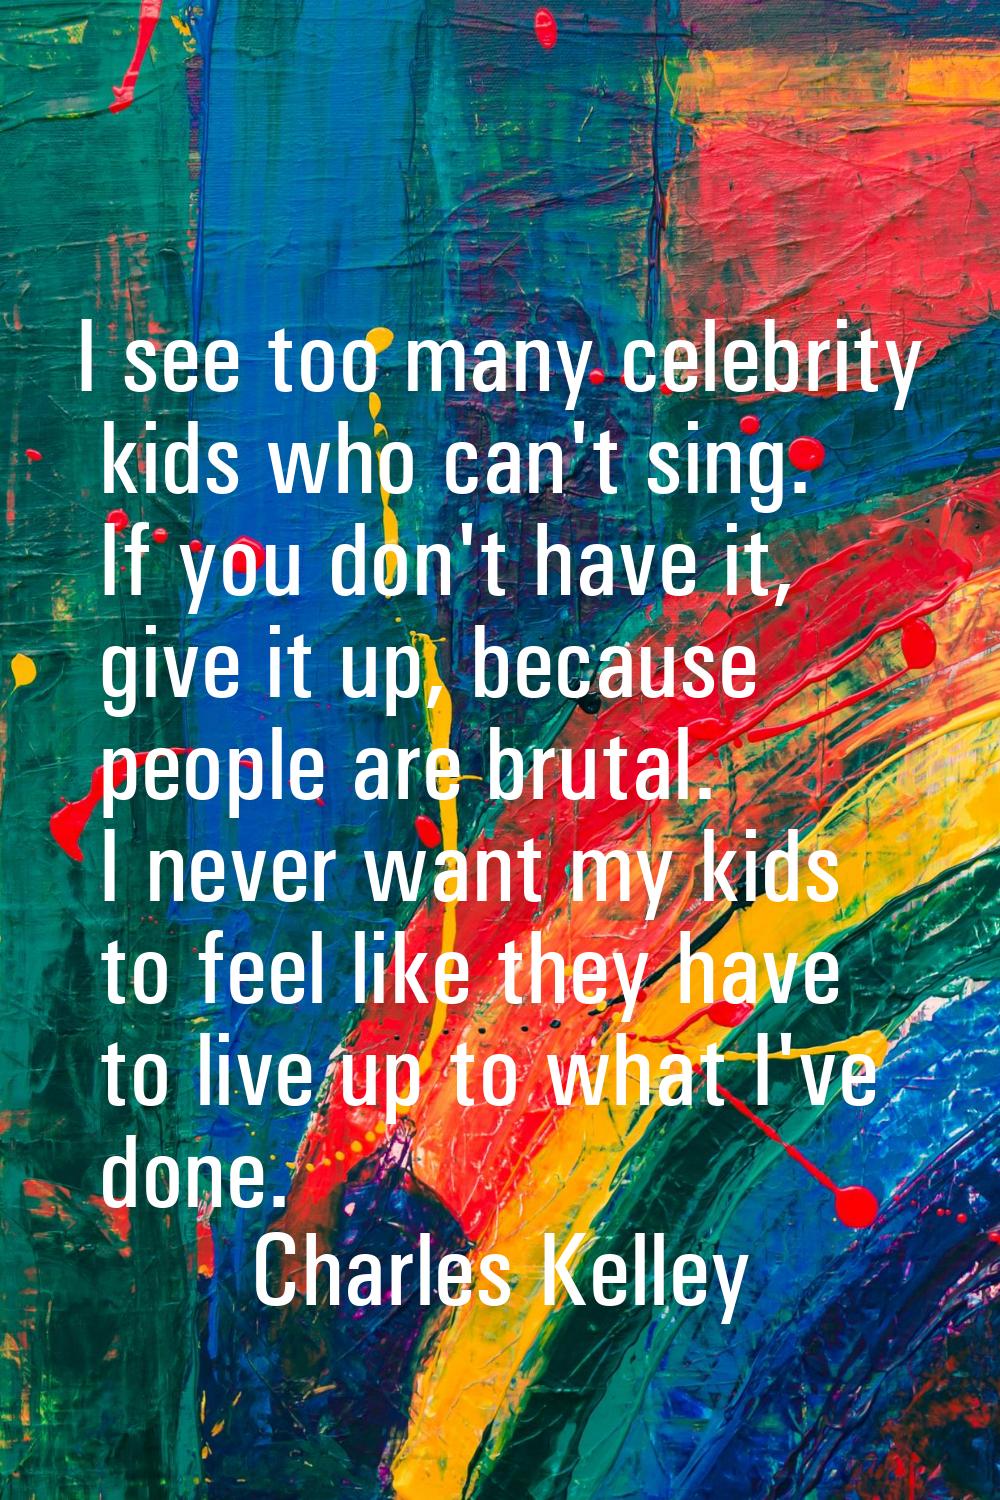 I see too many celebrity kids who can't sing. If you don't have it, give it up, because people are 